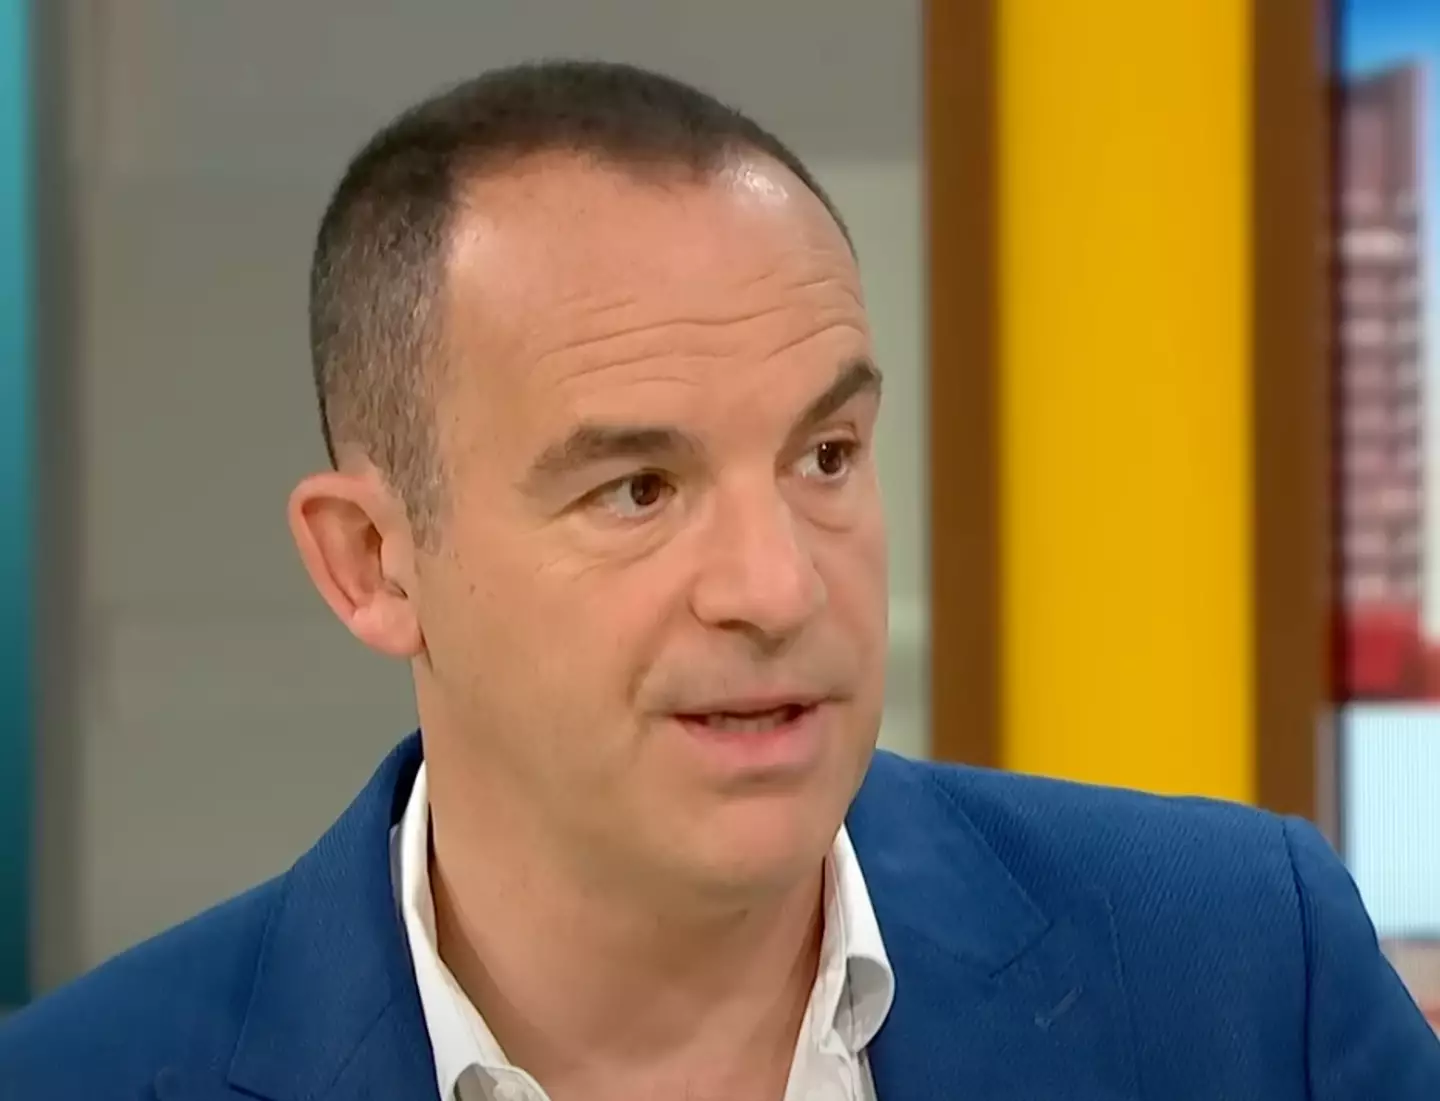 Martin Lewis issued an urgent warning to Vinted users following new HMRC rules.